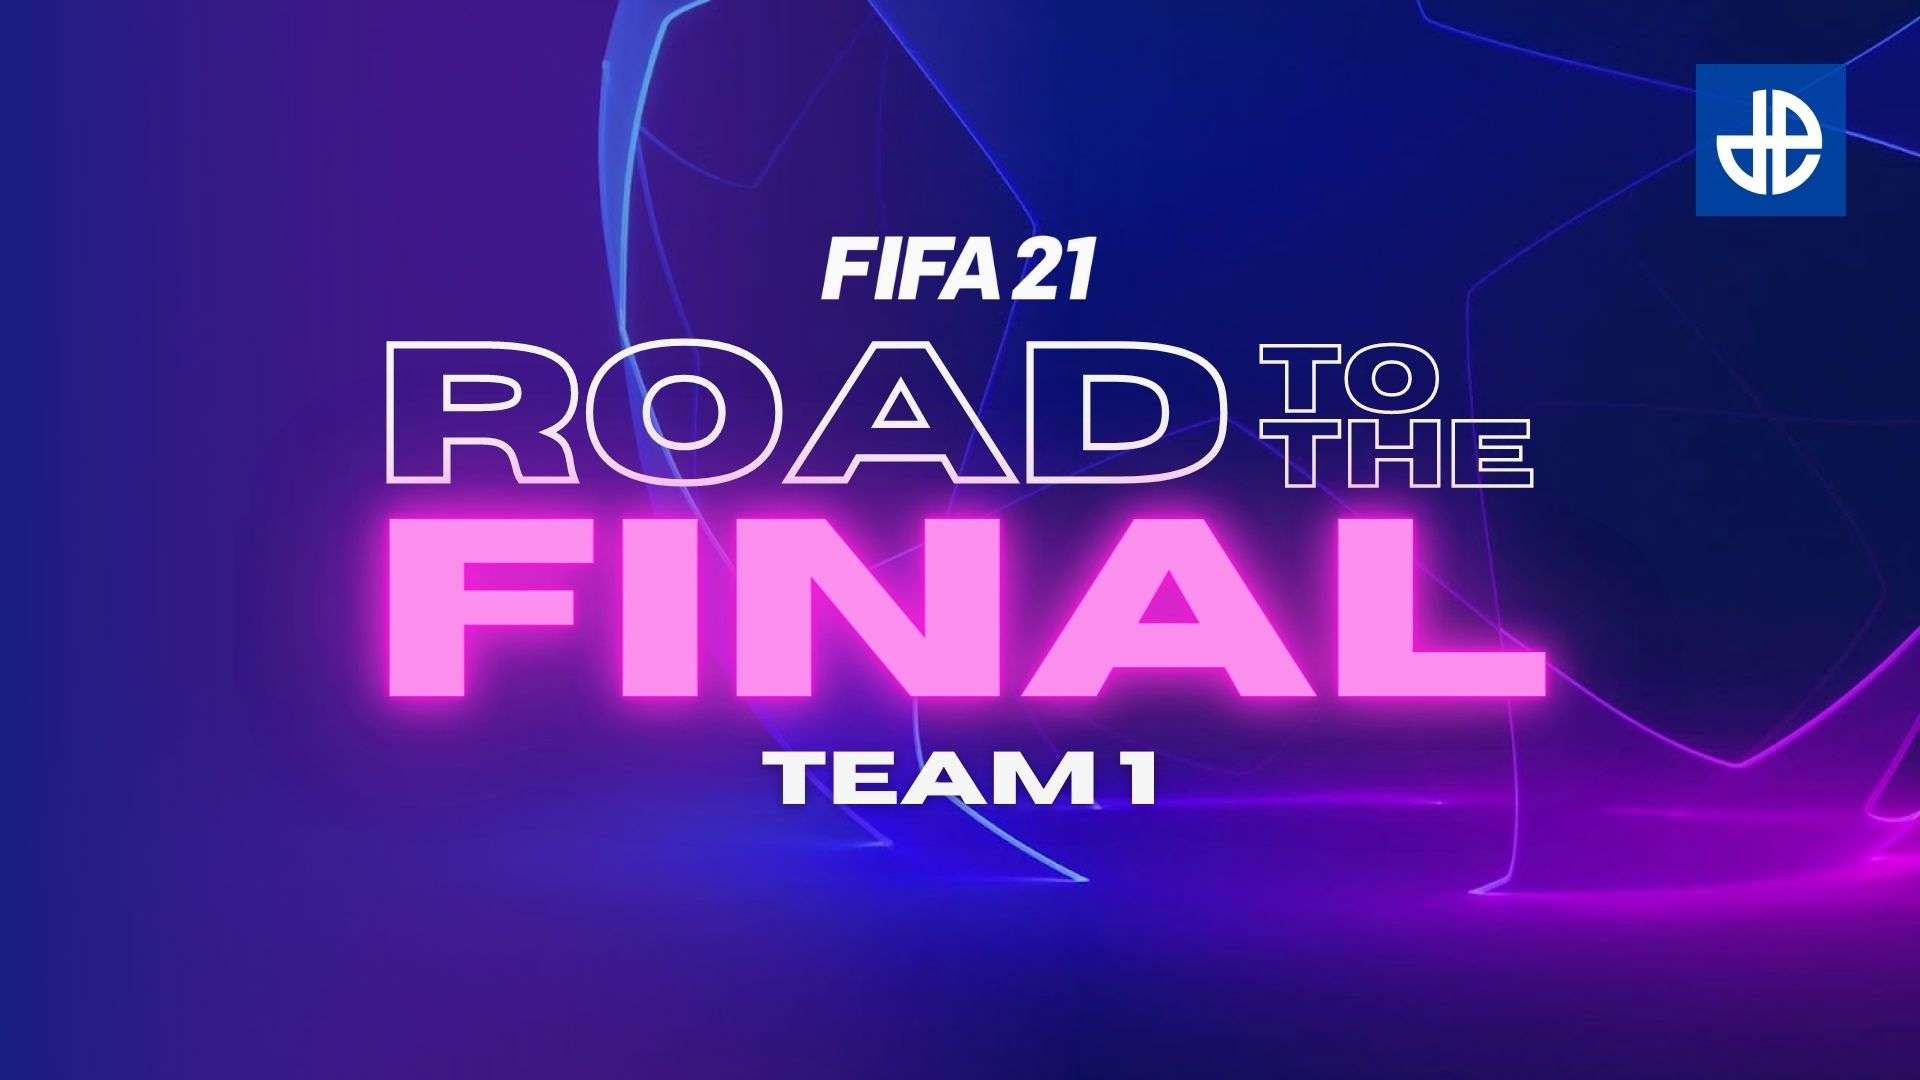 FIFA 21 road to the final